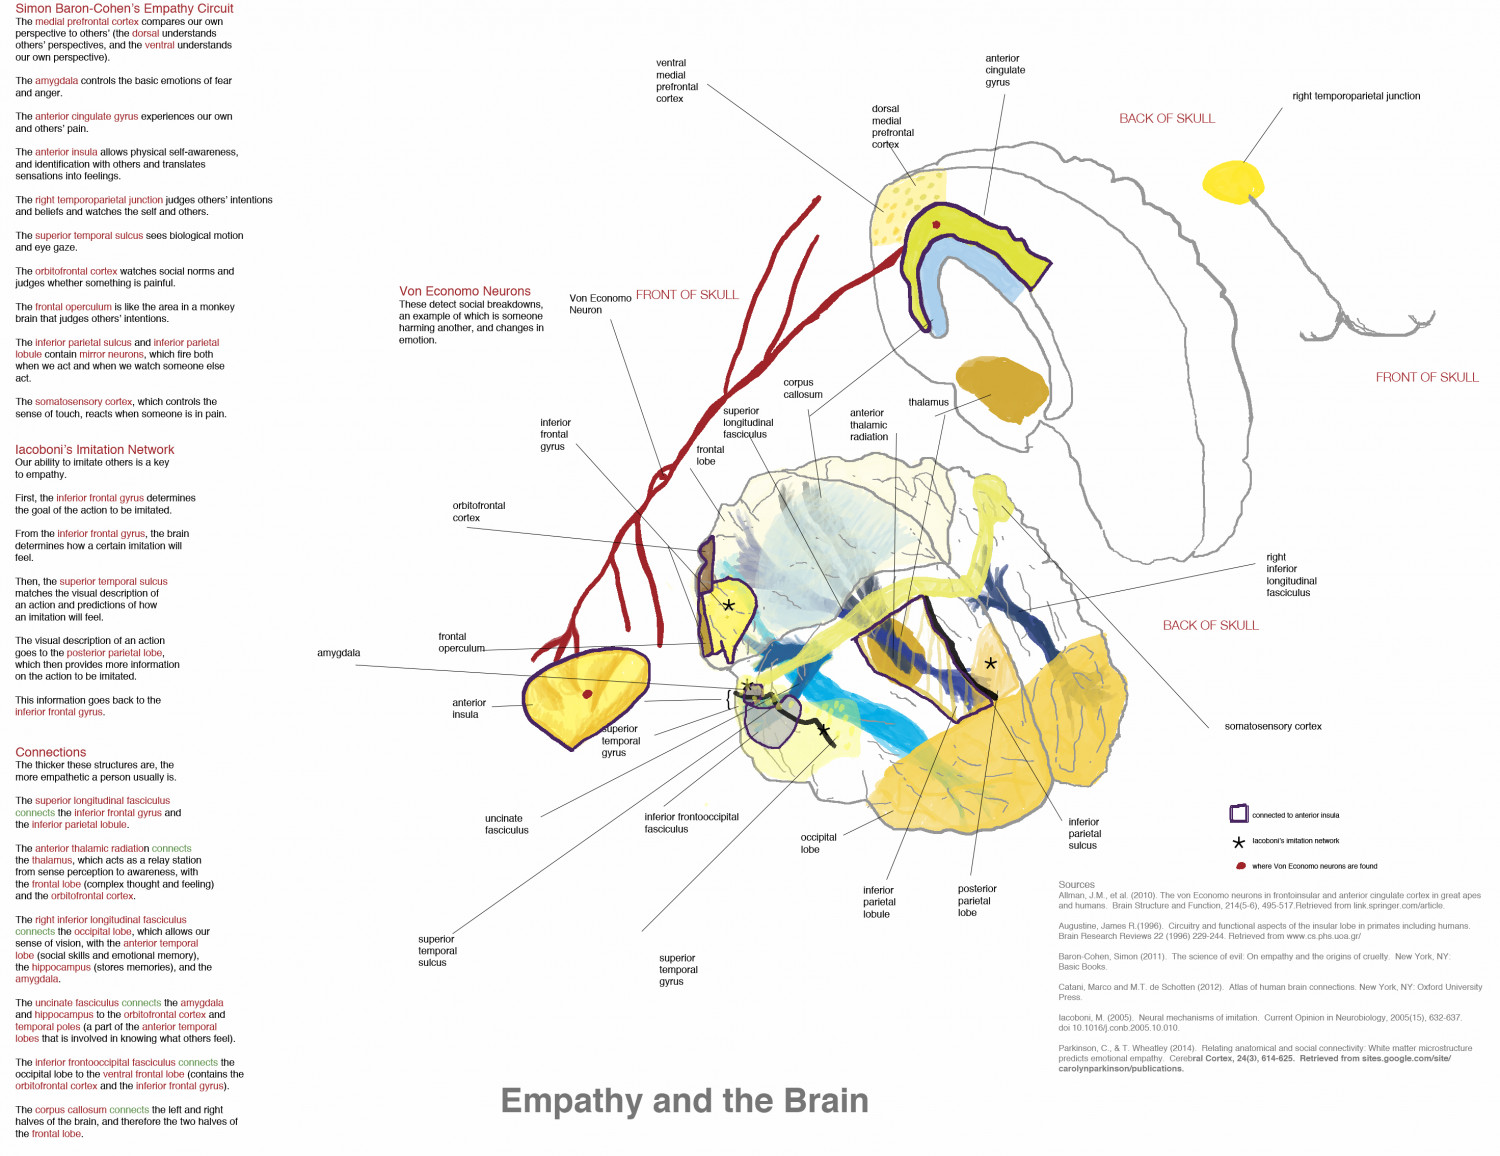 Empathy and the Brain Infographic